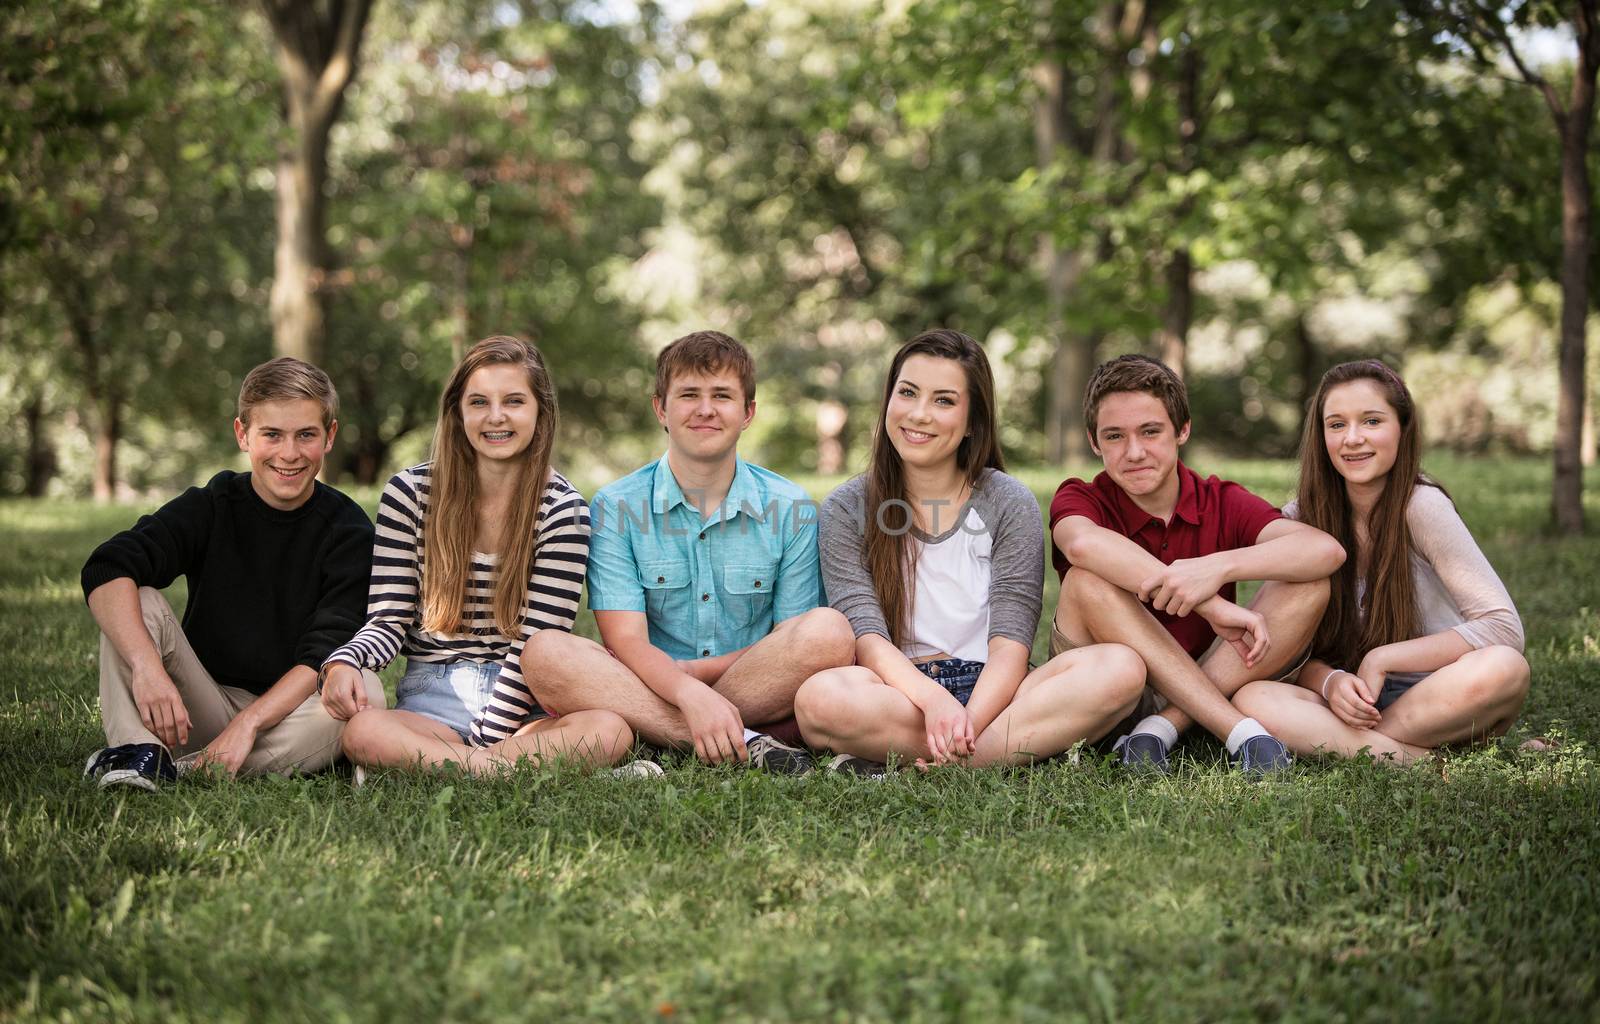 Group of six teens sitting outdoors on grass